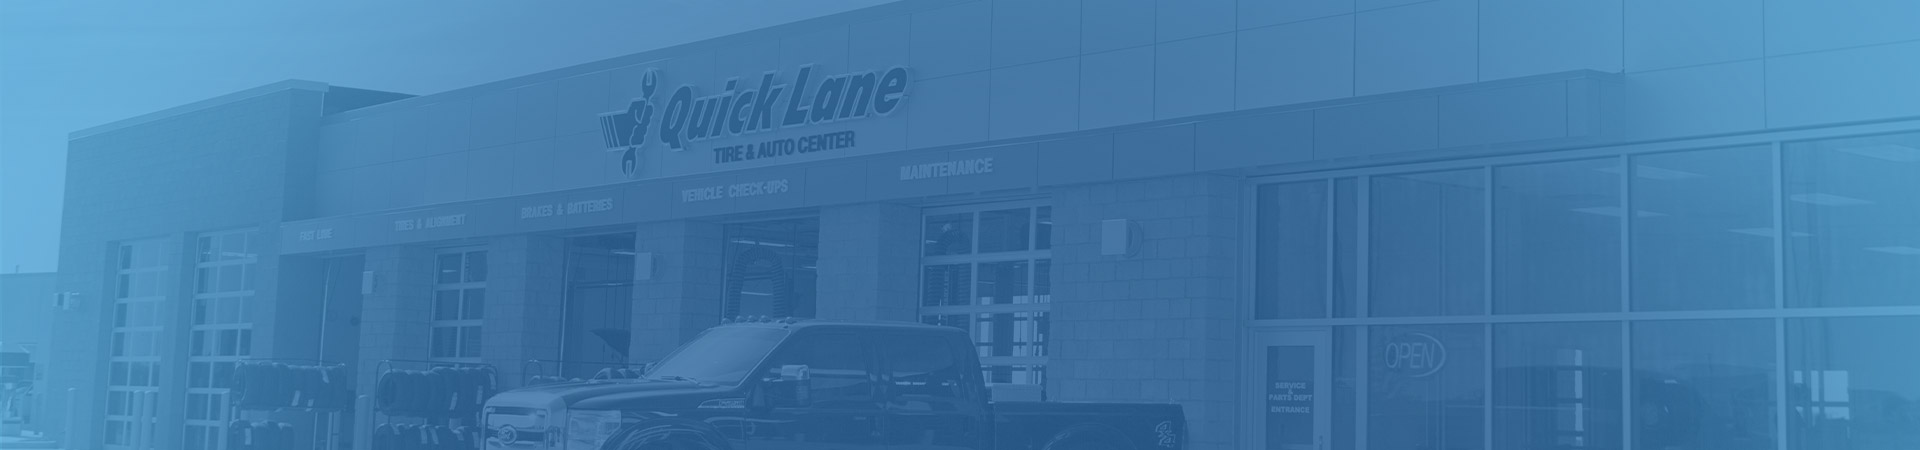 Quick Lane at Anderson Ford of Lincoln South